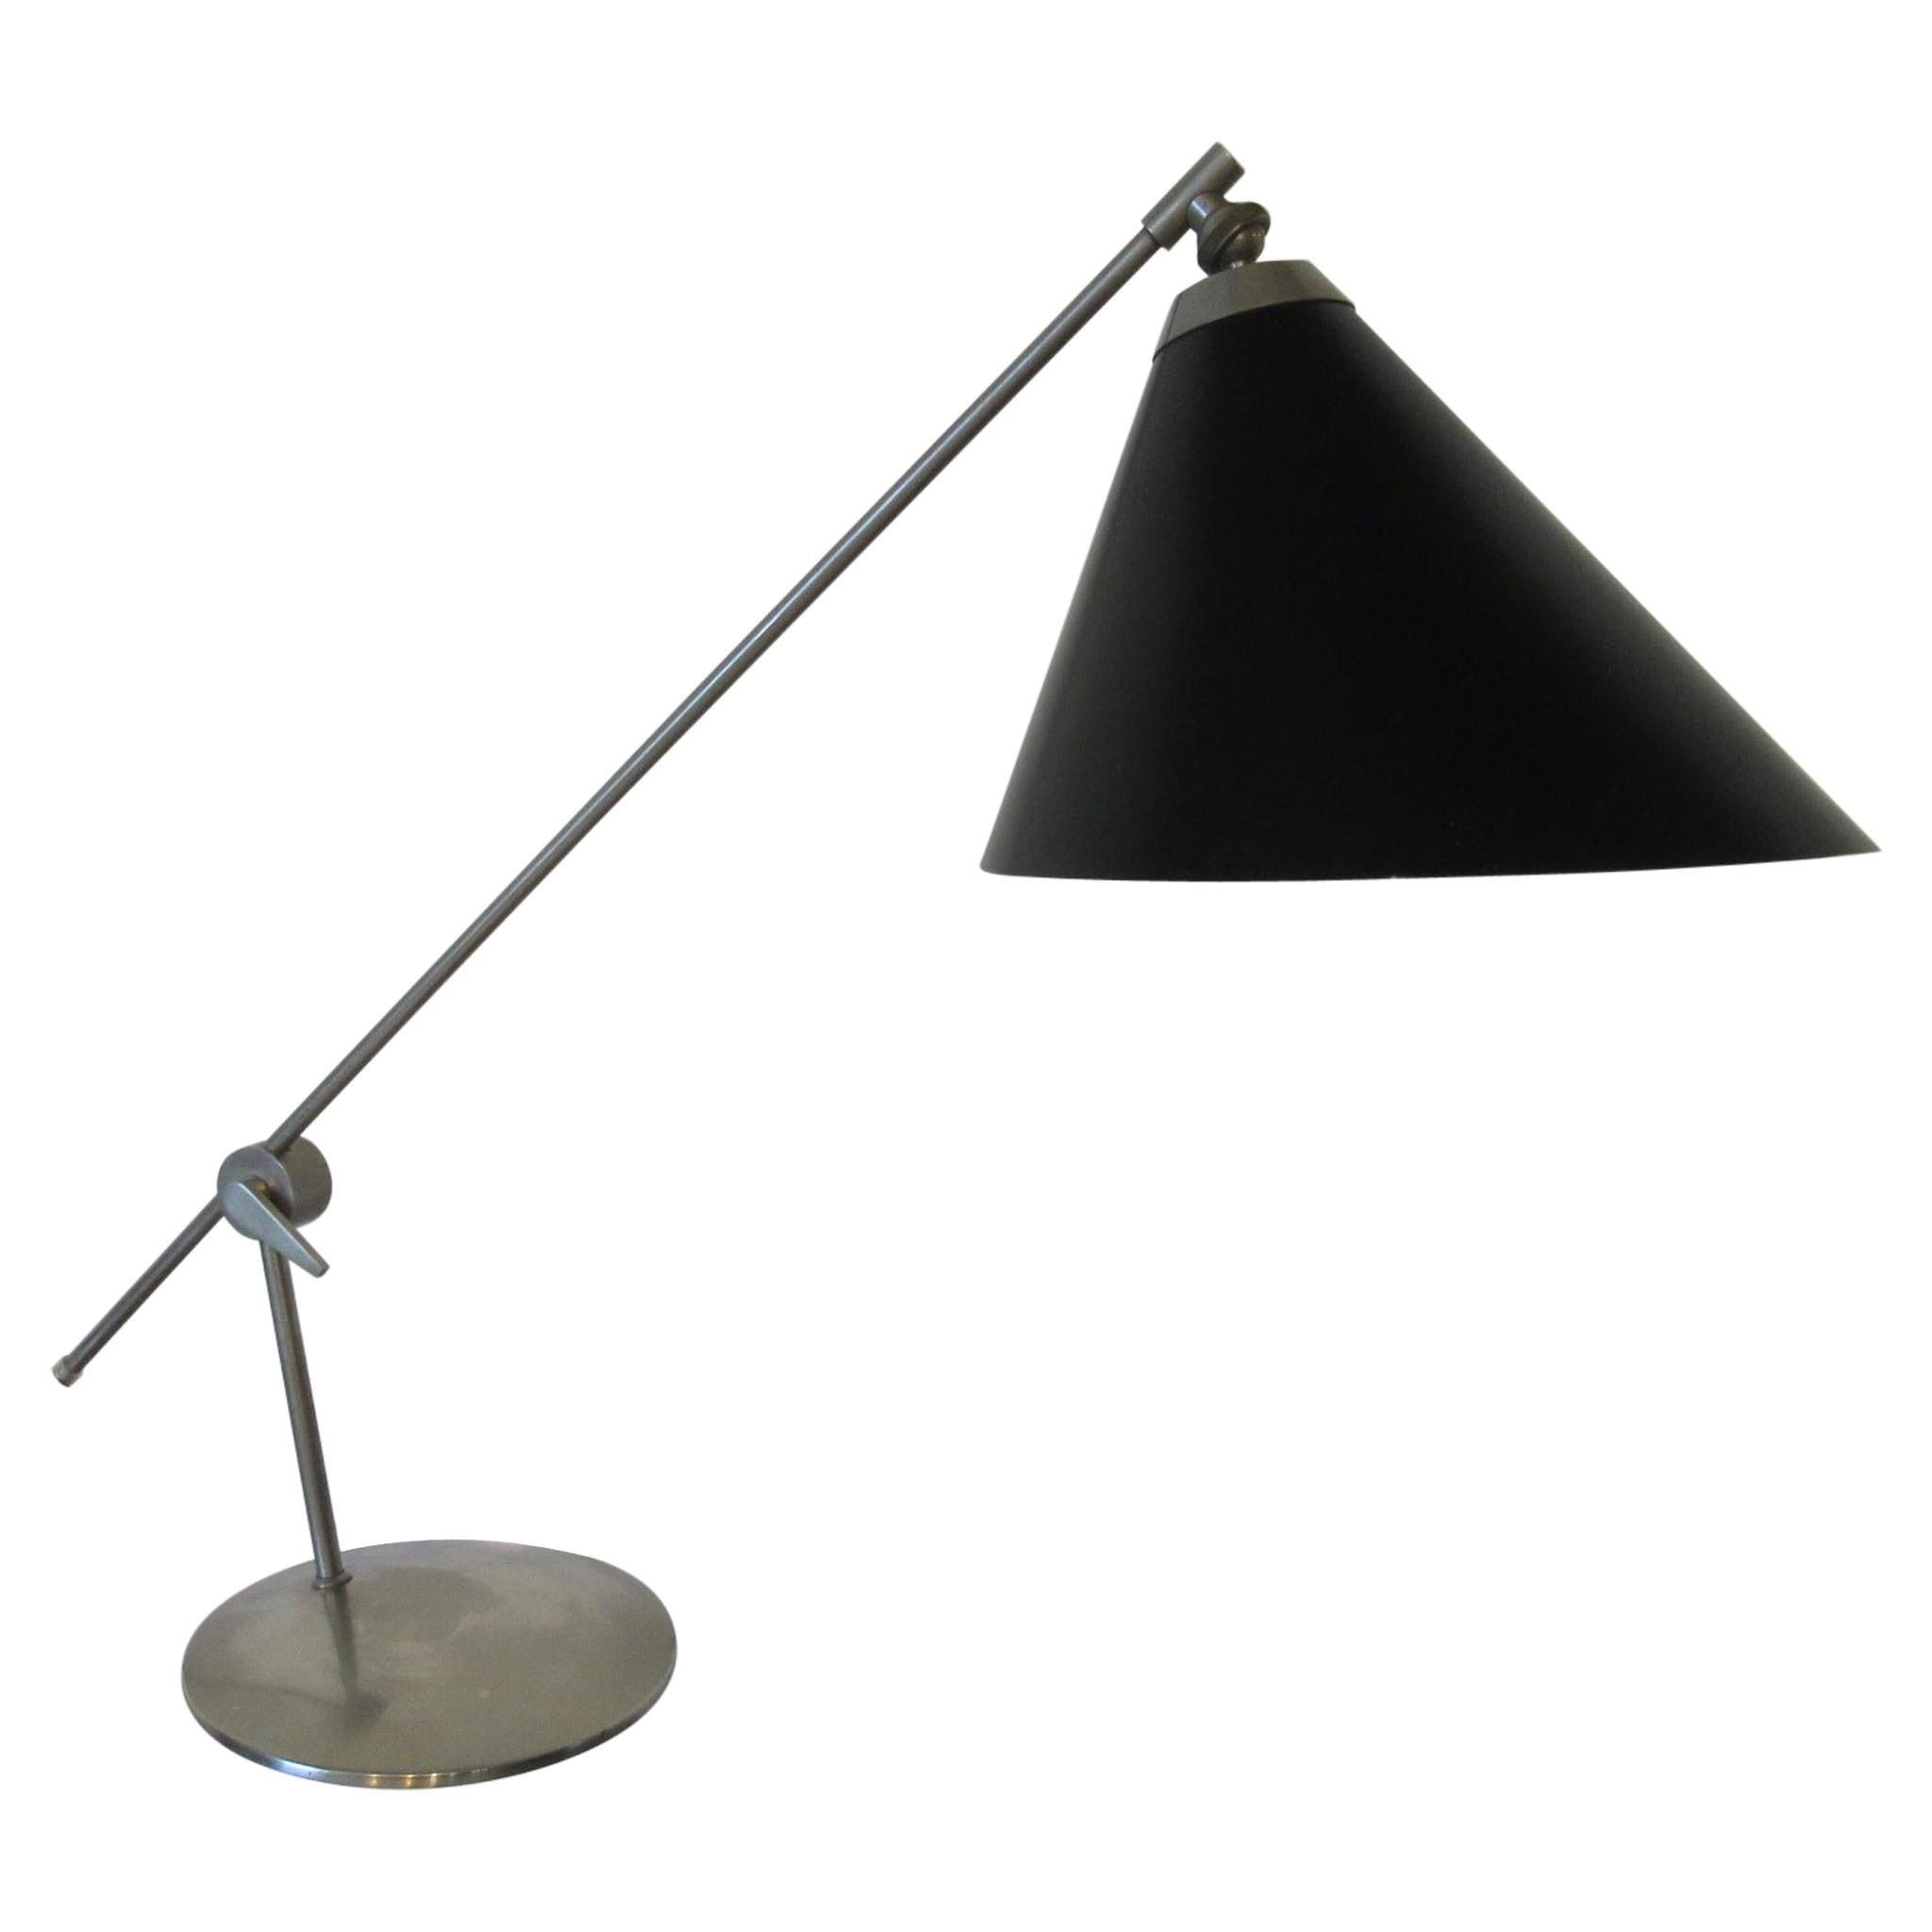 Th. Valentiner Mid Century Table Lamp made in Denmark